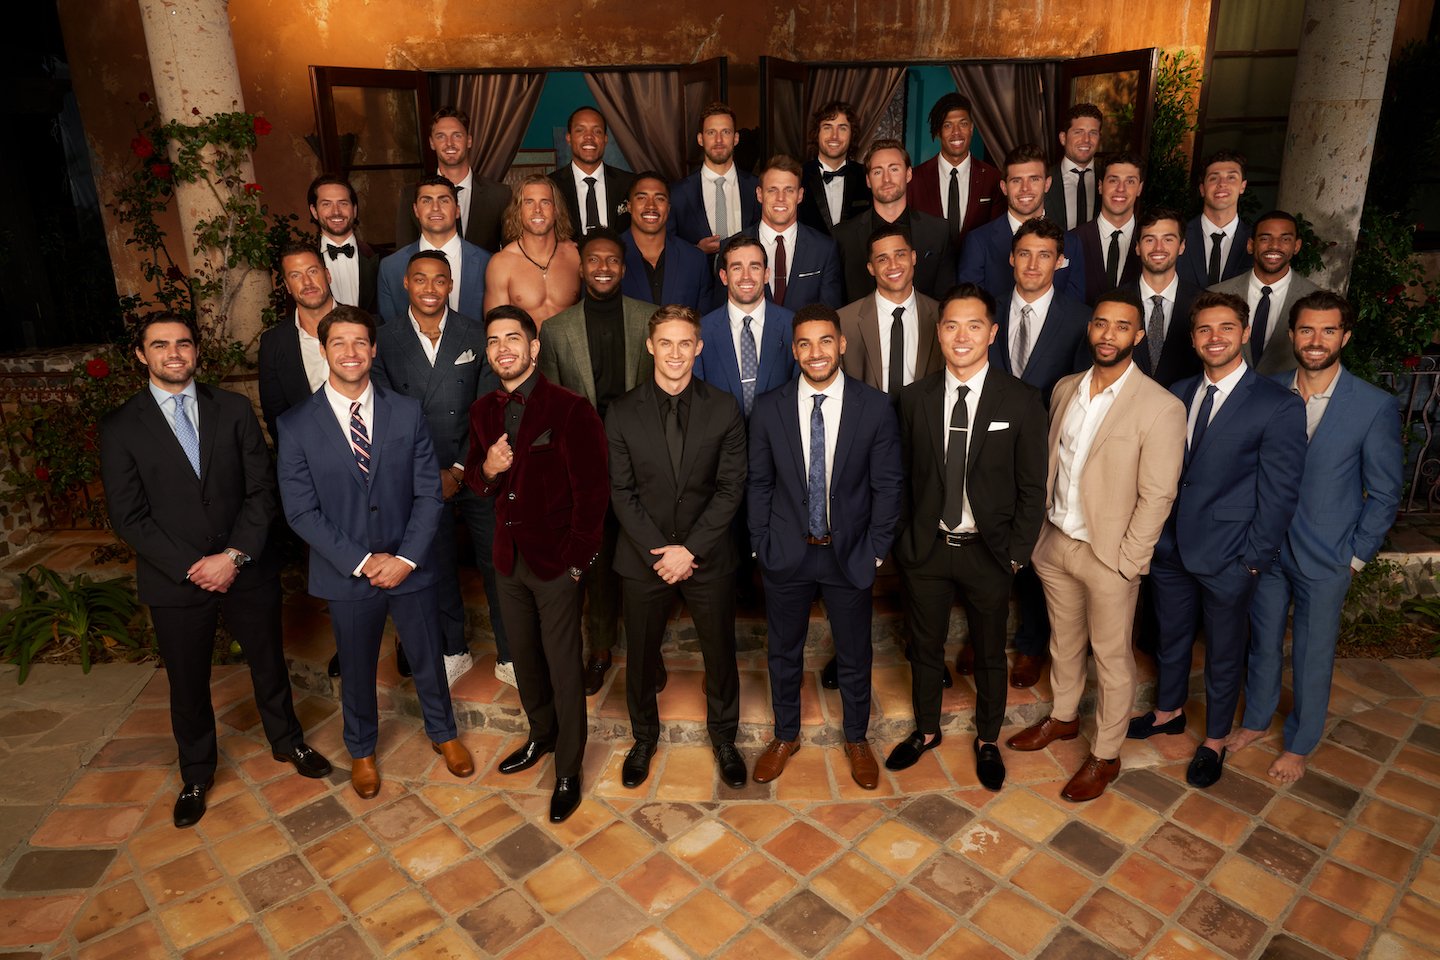 'The Bachelorette' Season 19 cast standing together in suits and smiling